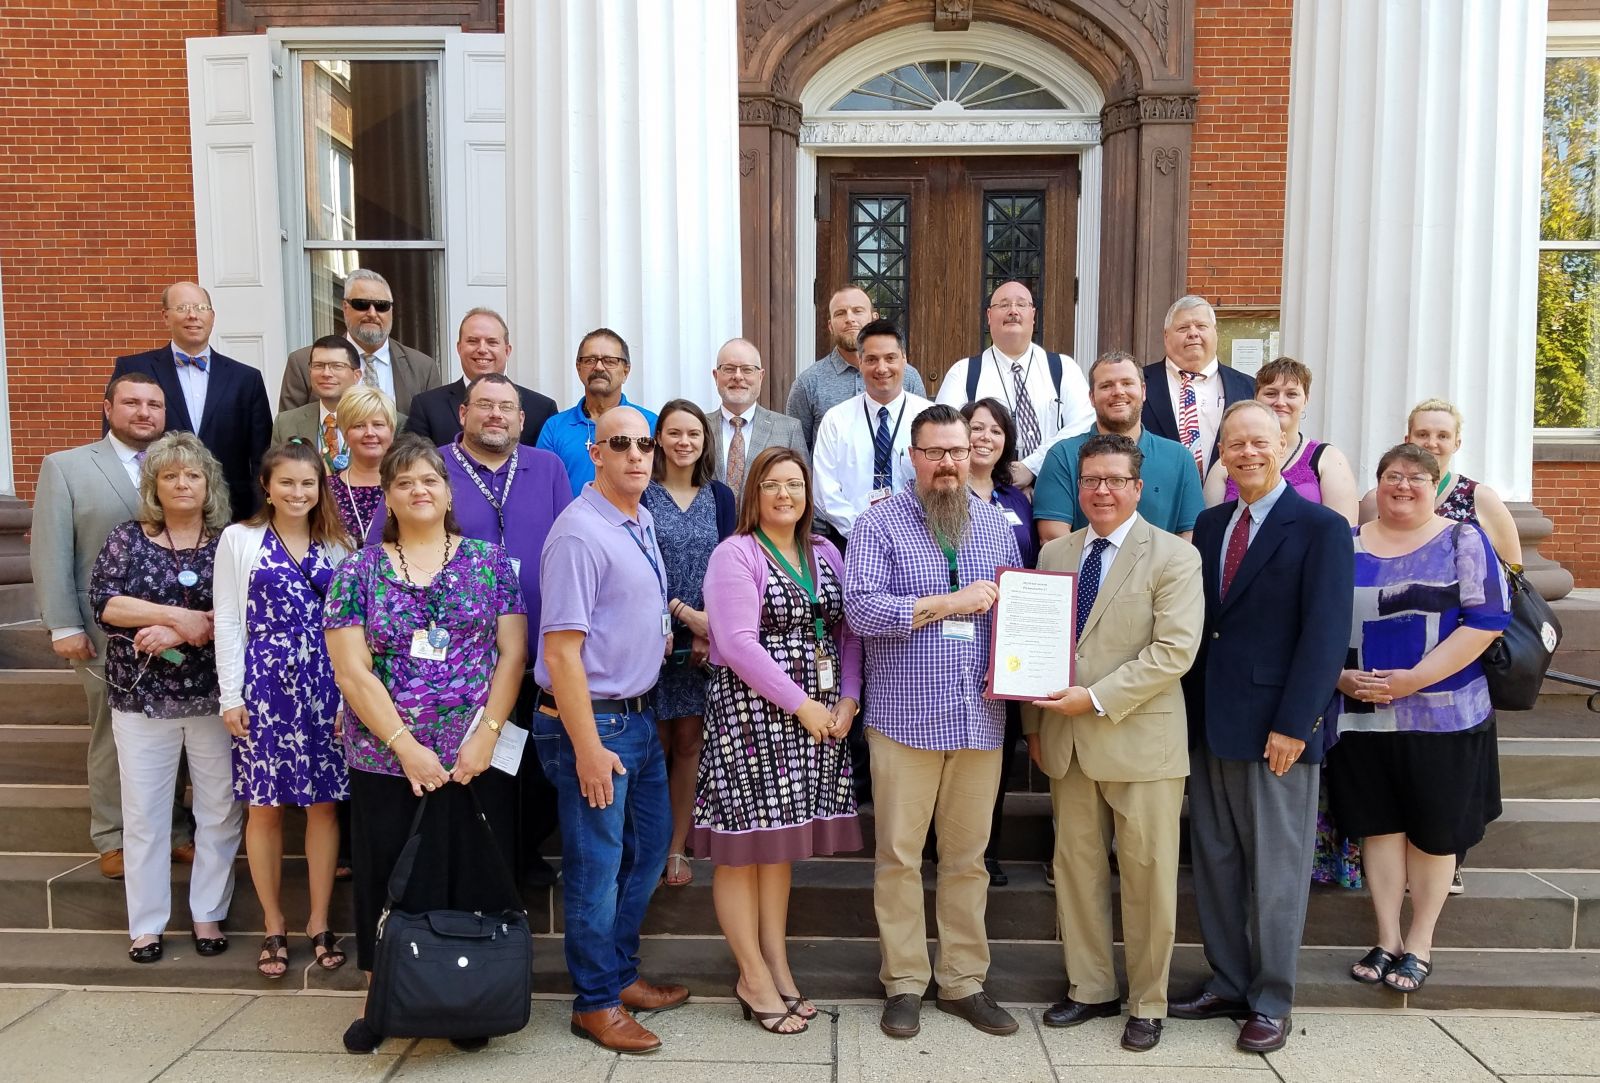 On Tuesday morning, a proclamation was read in front of the courthouse naming September as Recovery Month in Franklin County. Representatives gather on the courthouse steps holding the proclamation document.